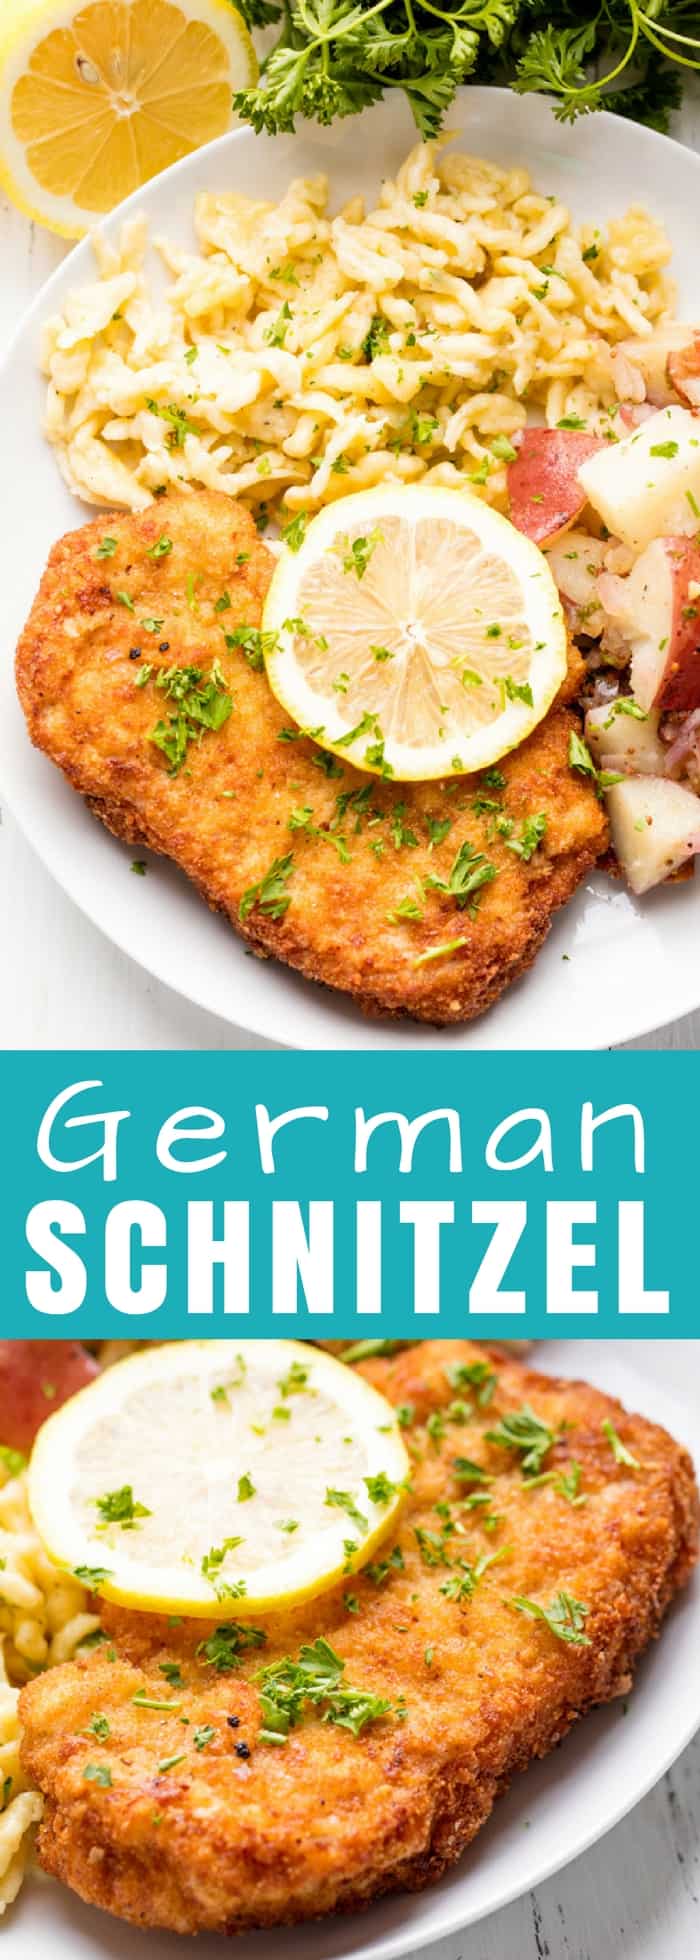 Granny's German Schnitzel Recipe has been passed down for generations. Use this same method for pork schnitzel, veal schnitzel (weiner schnitzel), or chicken schnitzel.